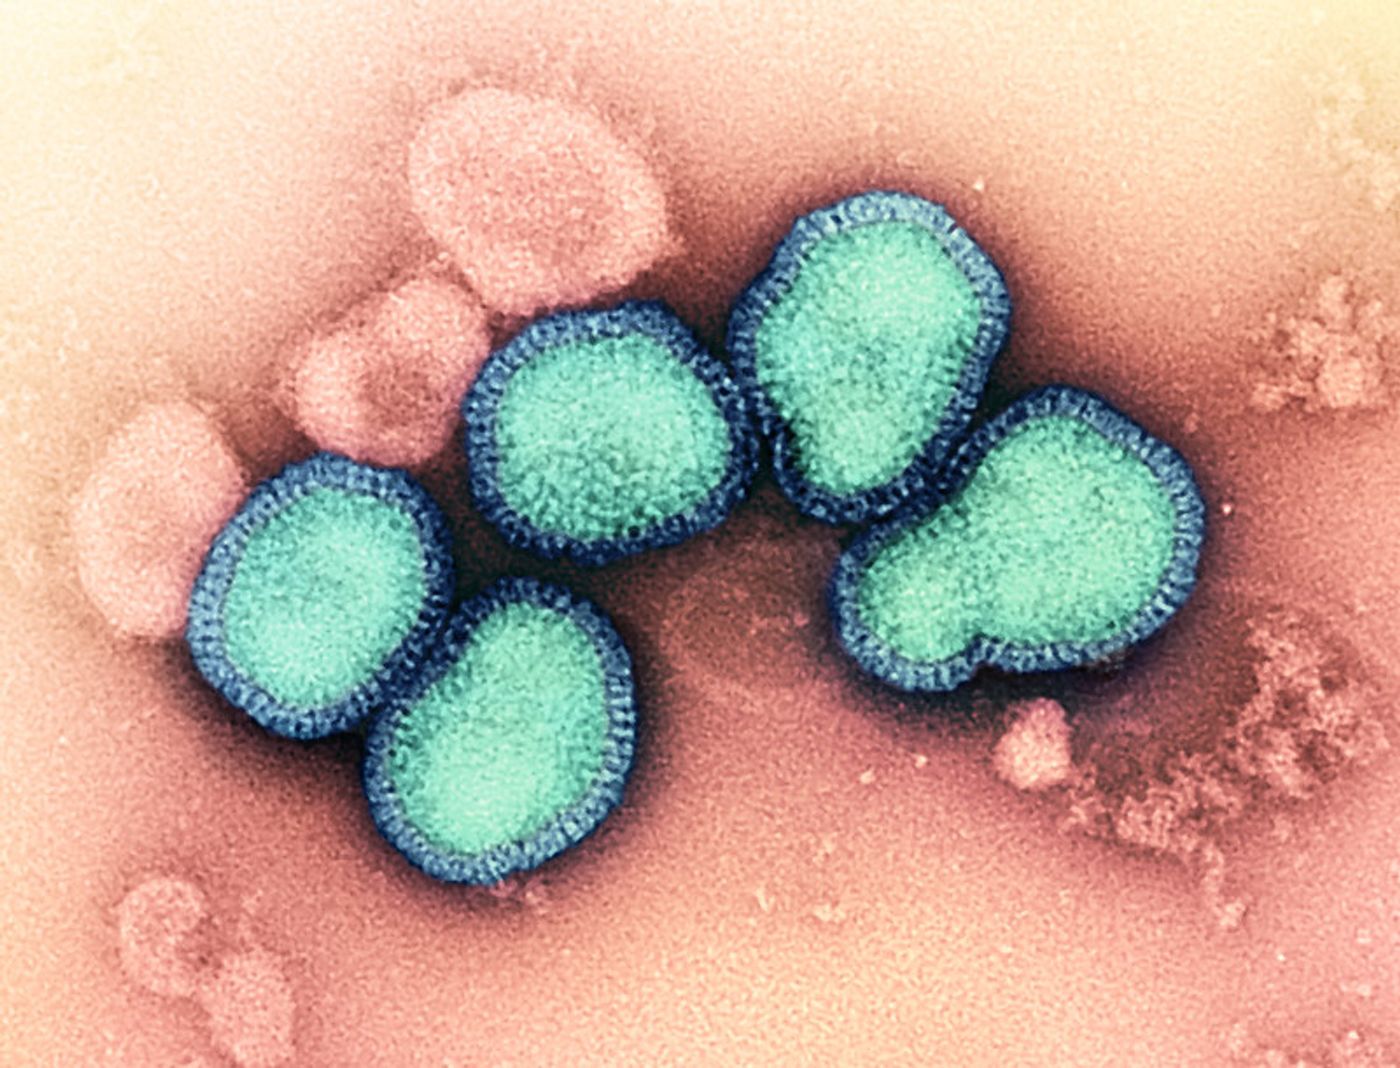  The H3N2 influenza strain, isolated from a patient in Victoria, Australia, in 1975. Historical strains can be used to study the immune response elicited by universal flu vaccine candidates. / Image credit: Microscopy by John Gallagher and Audray Harris, NIAID Laboratory of Infectious Diseases. / Credit: NIAID